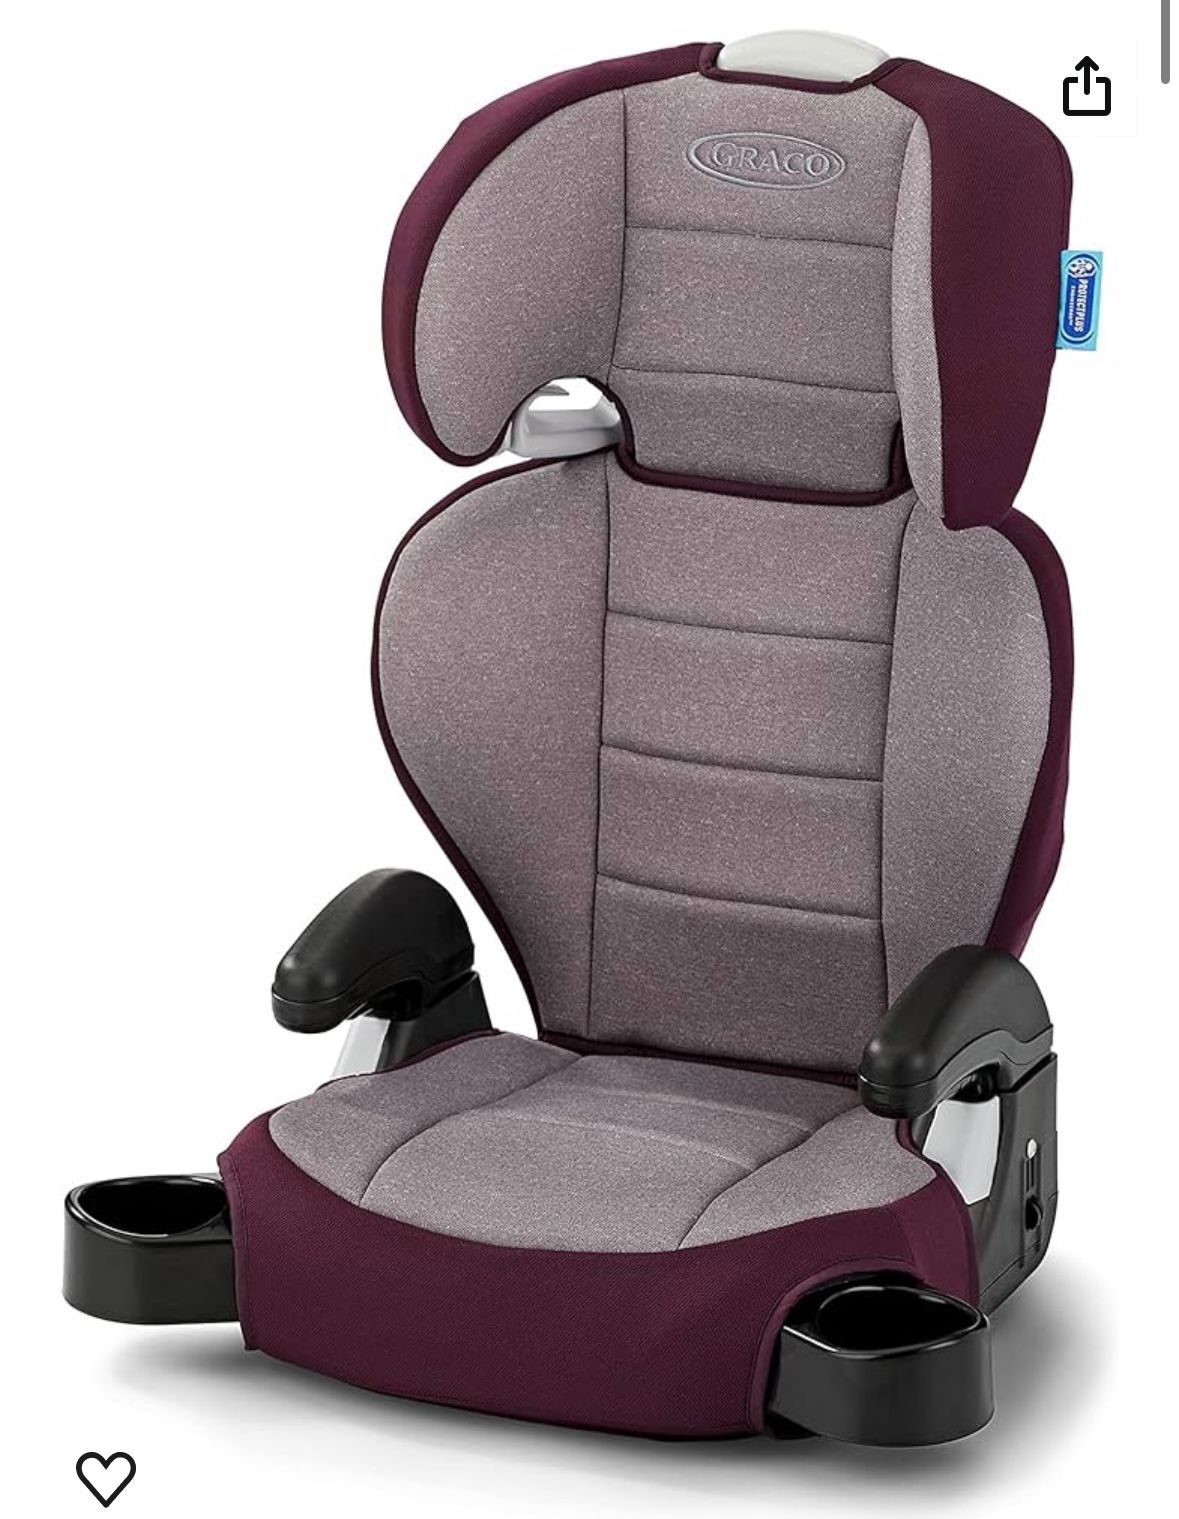 Graco Highback Booster Car Seat